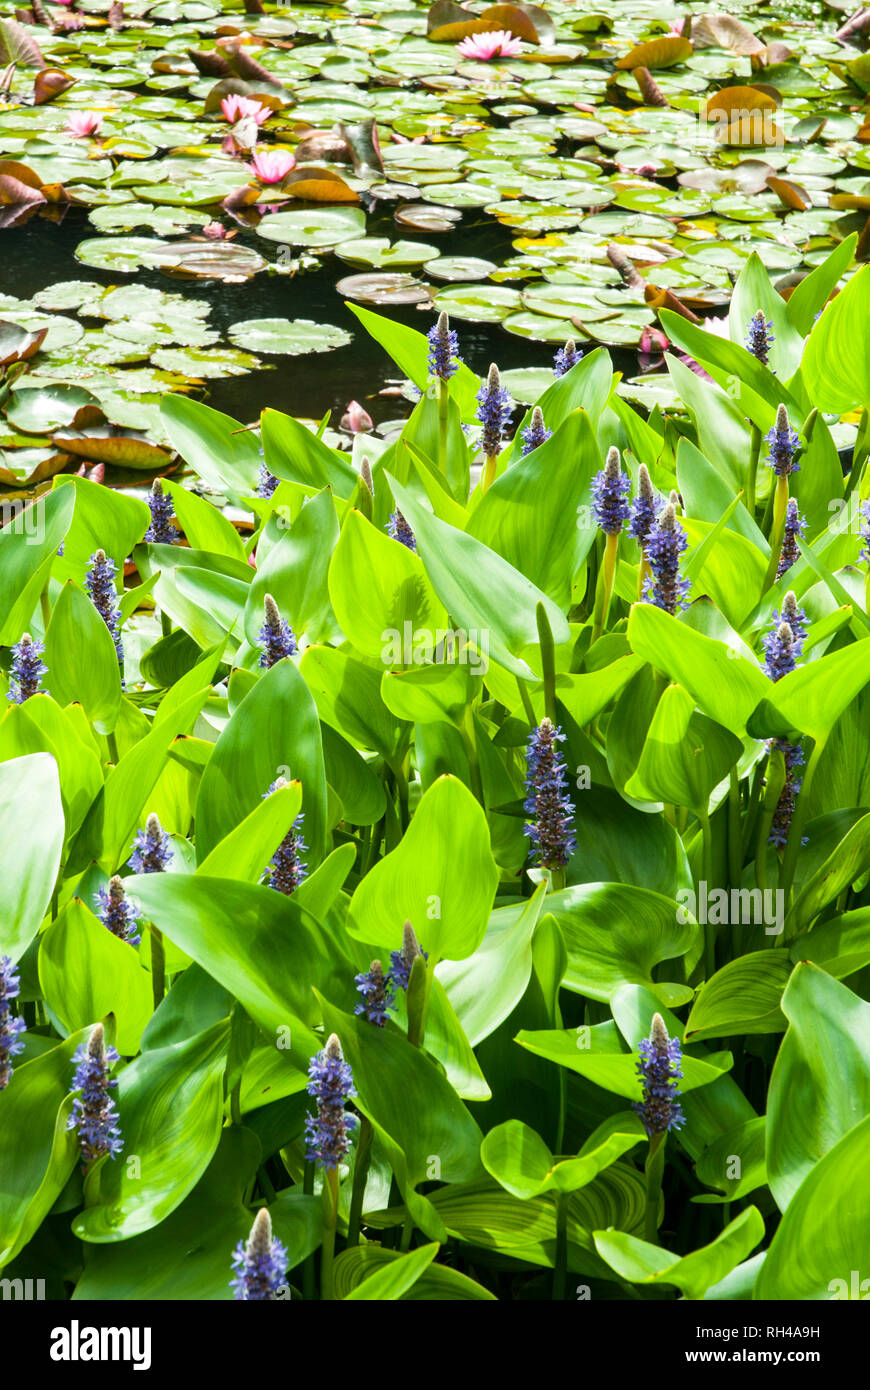 In the foreground a swathe of Giant Pickerel Weed with purple spikes of flowers and heart shaped leaves; in the background a pond with water lilies. Stock Photo